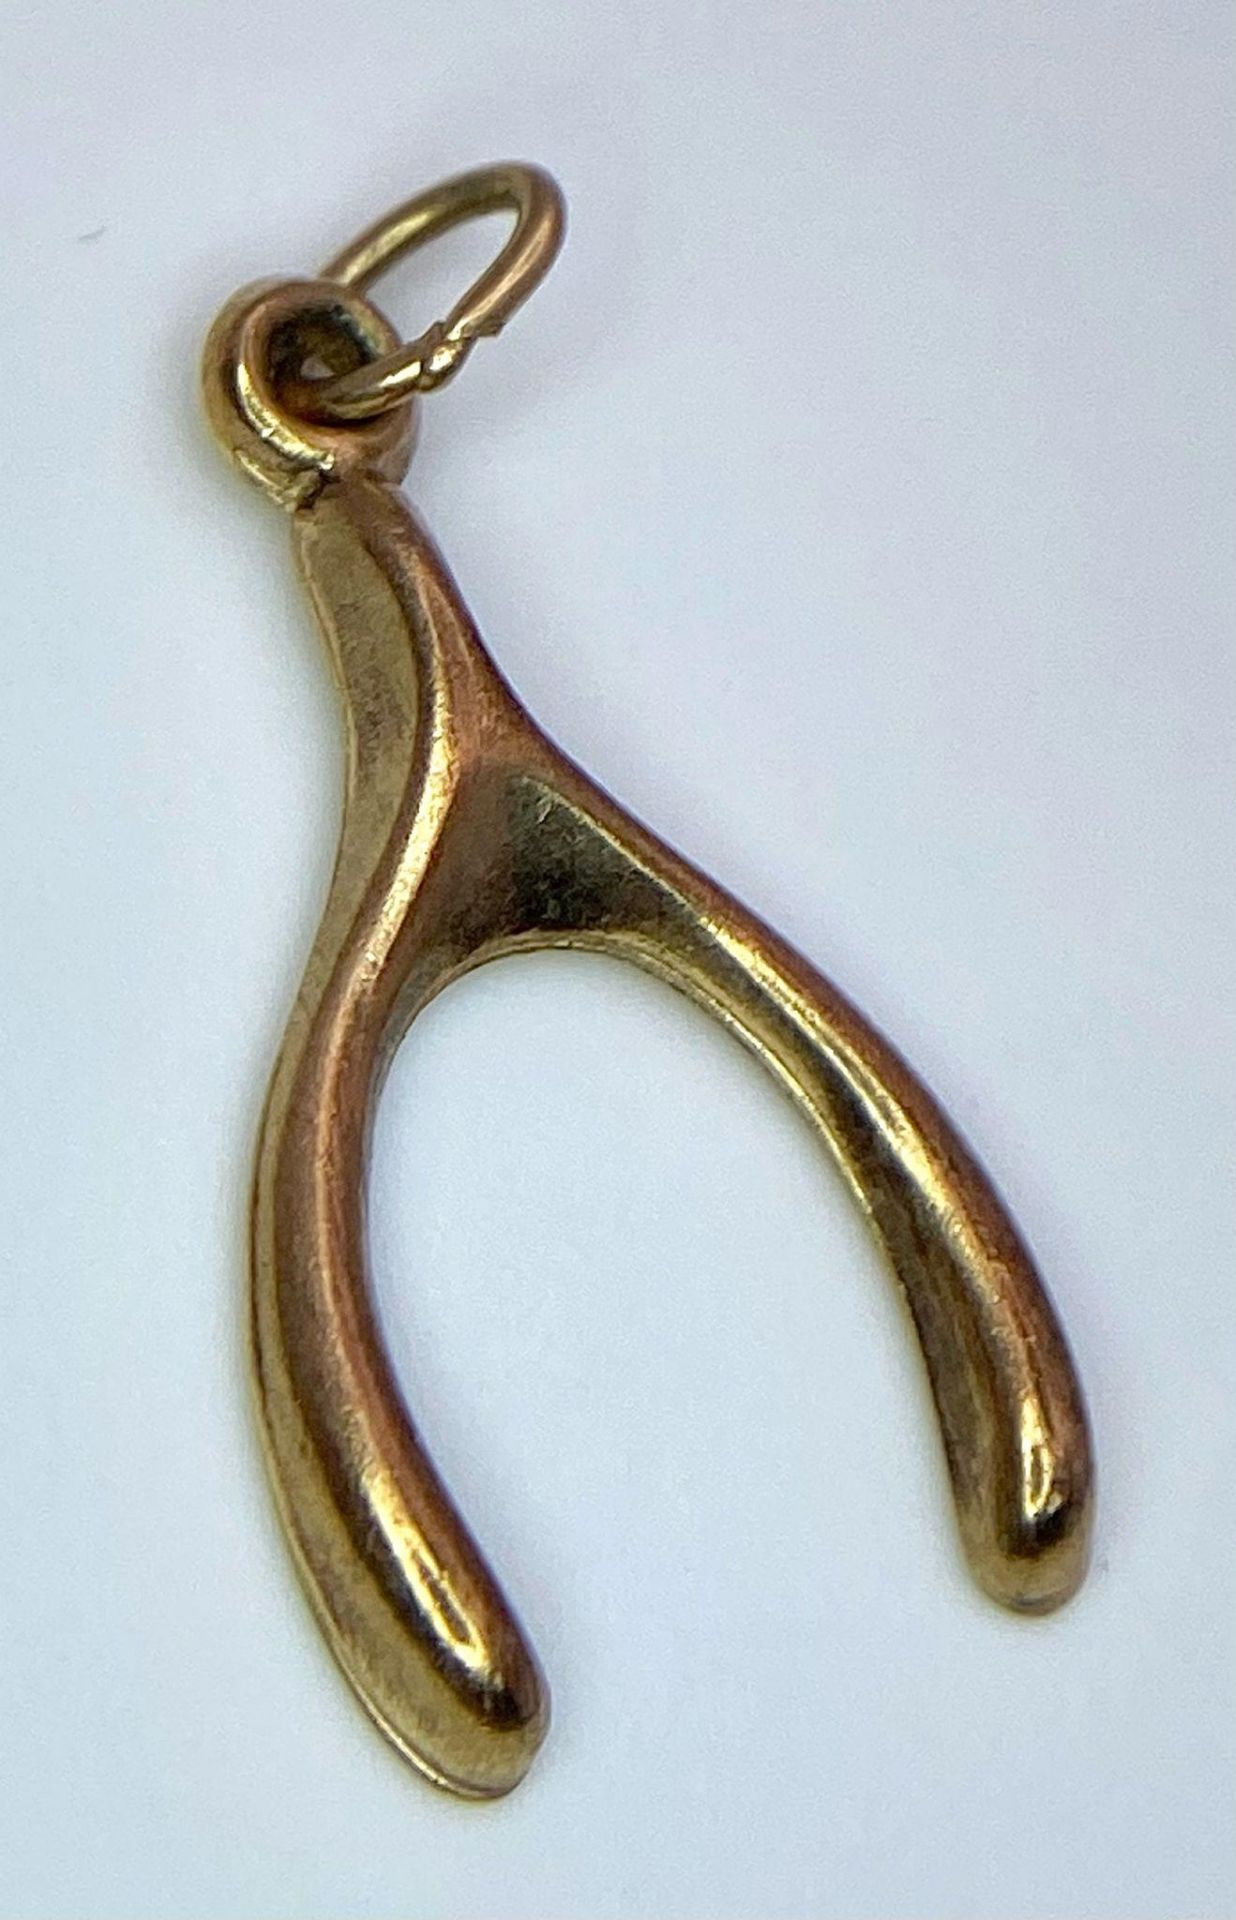 A 9K YELLOW GOLD WISHBONE CHARM. TOTAL WEIGHT 0.4G